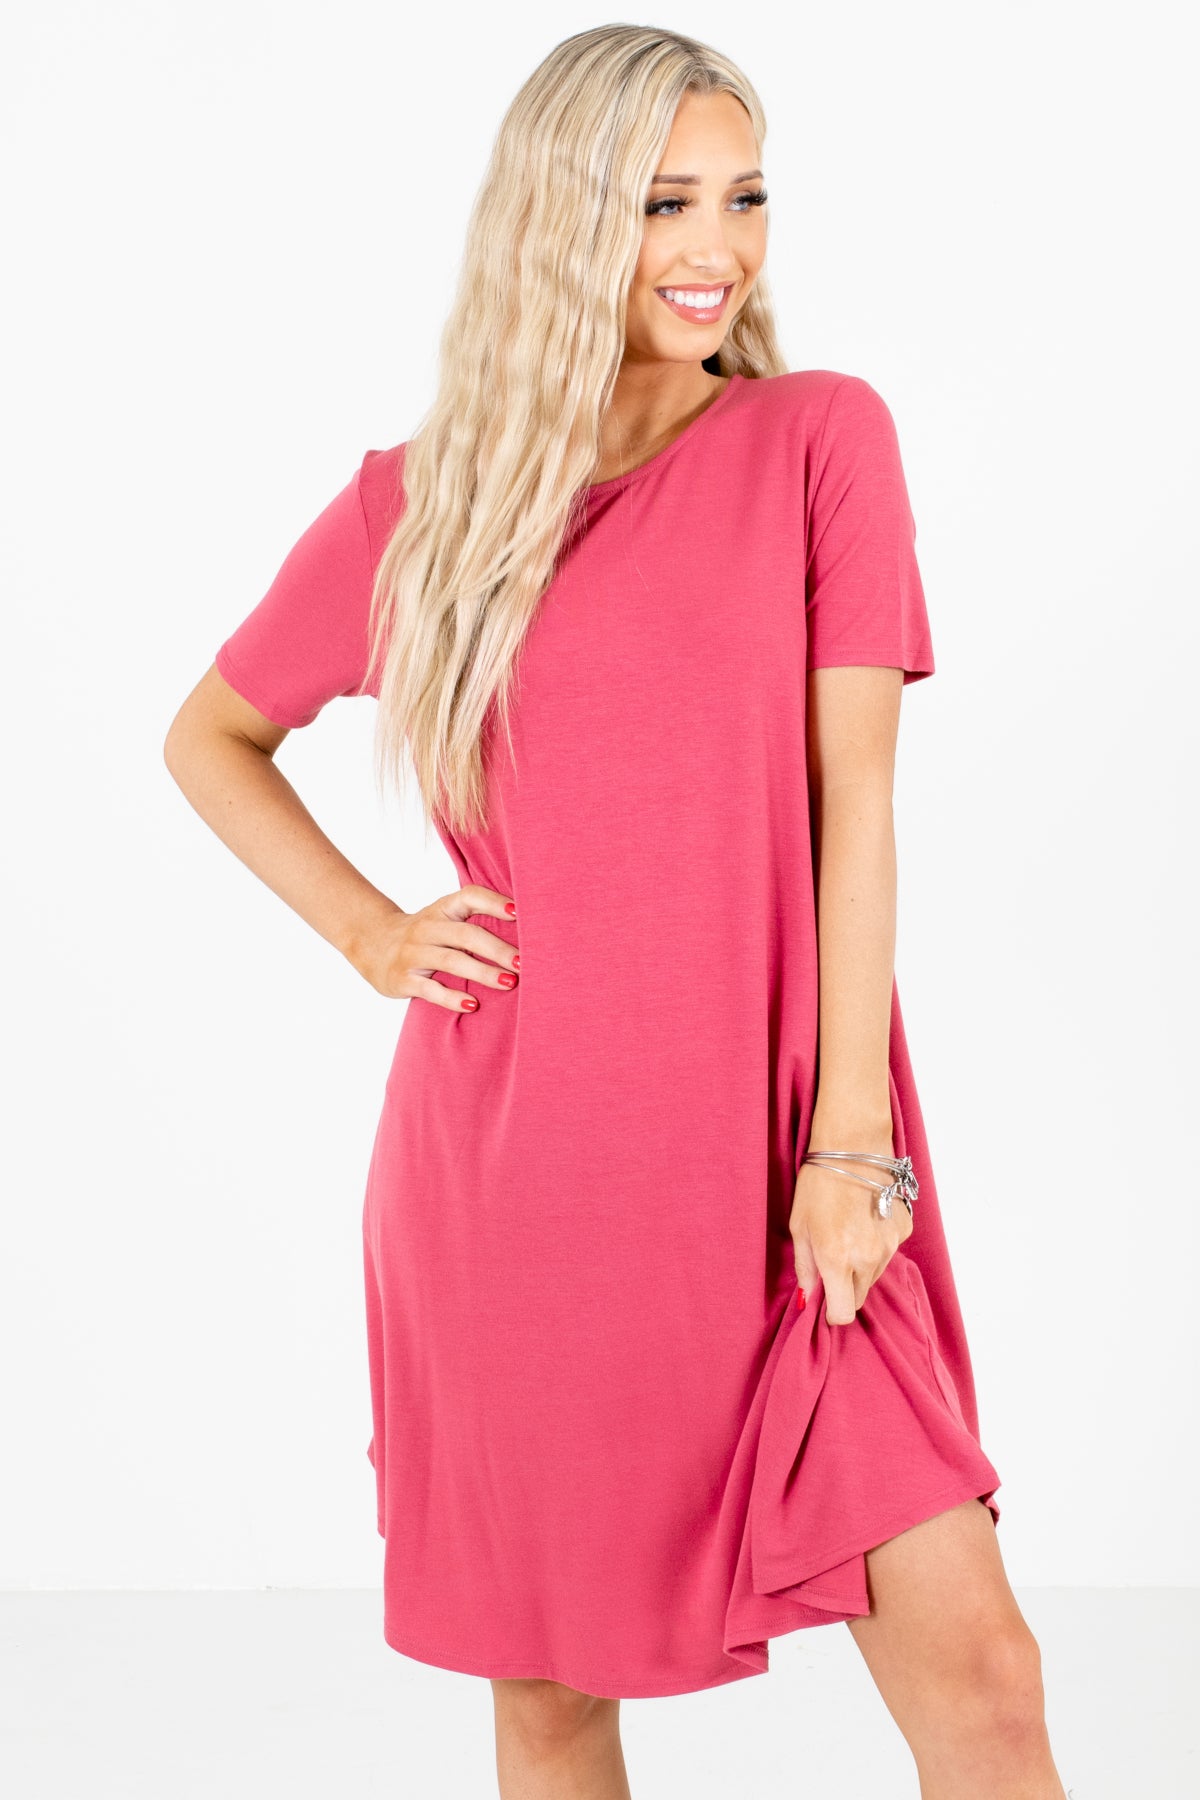 Pink High-Quality Stretchy Material Boutique Knee-Length Dresses for Women